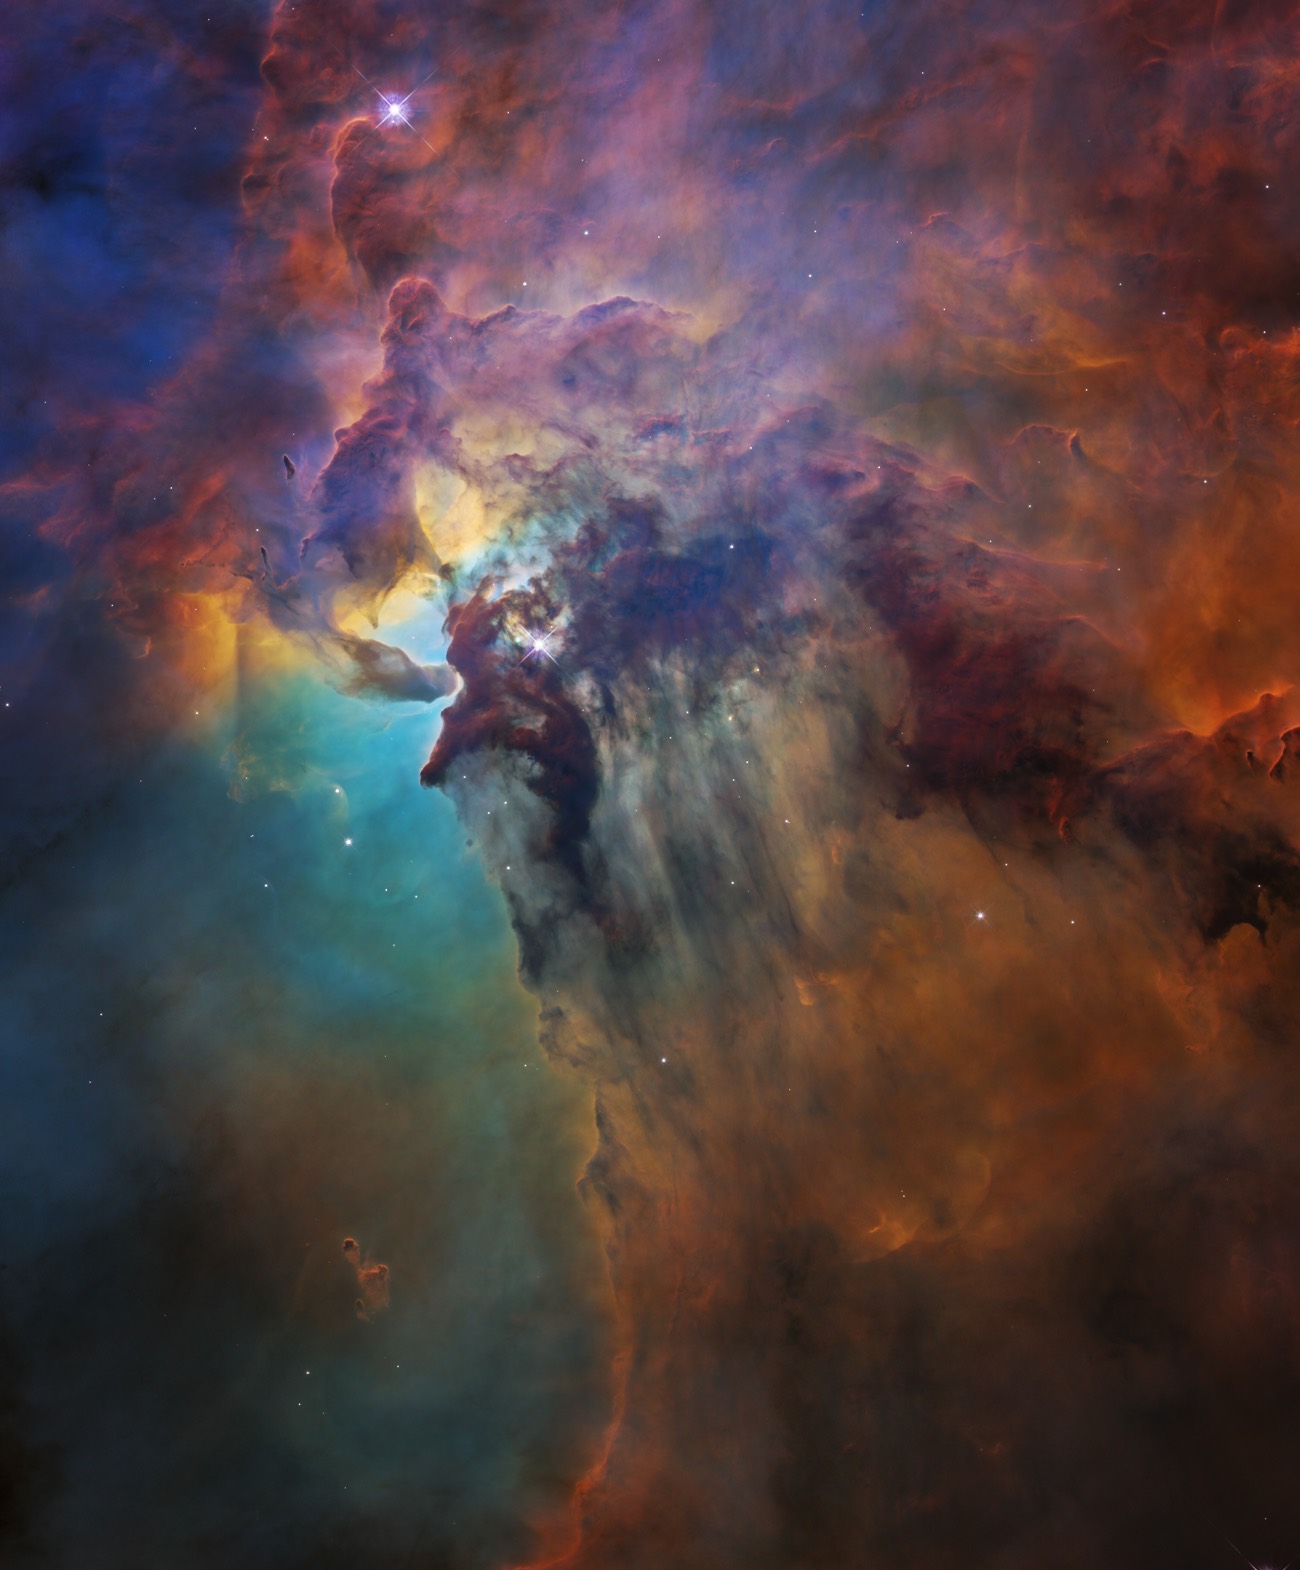 The Lagoon Nebula photographed by the Hubble Space Telescope in 2018 showing tower-like clouds surrounded by gaseous masses in which stars are formed